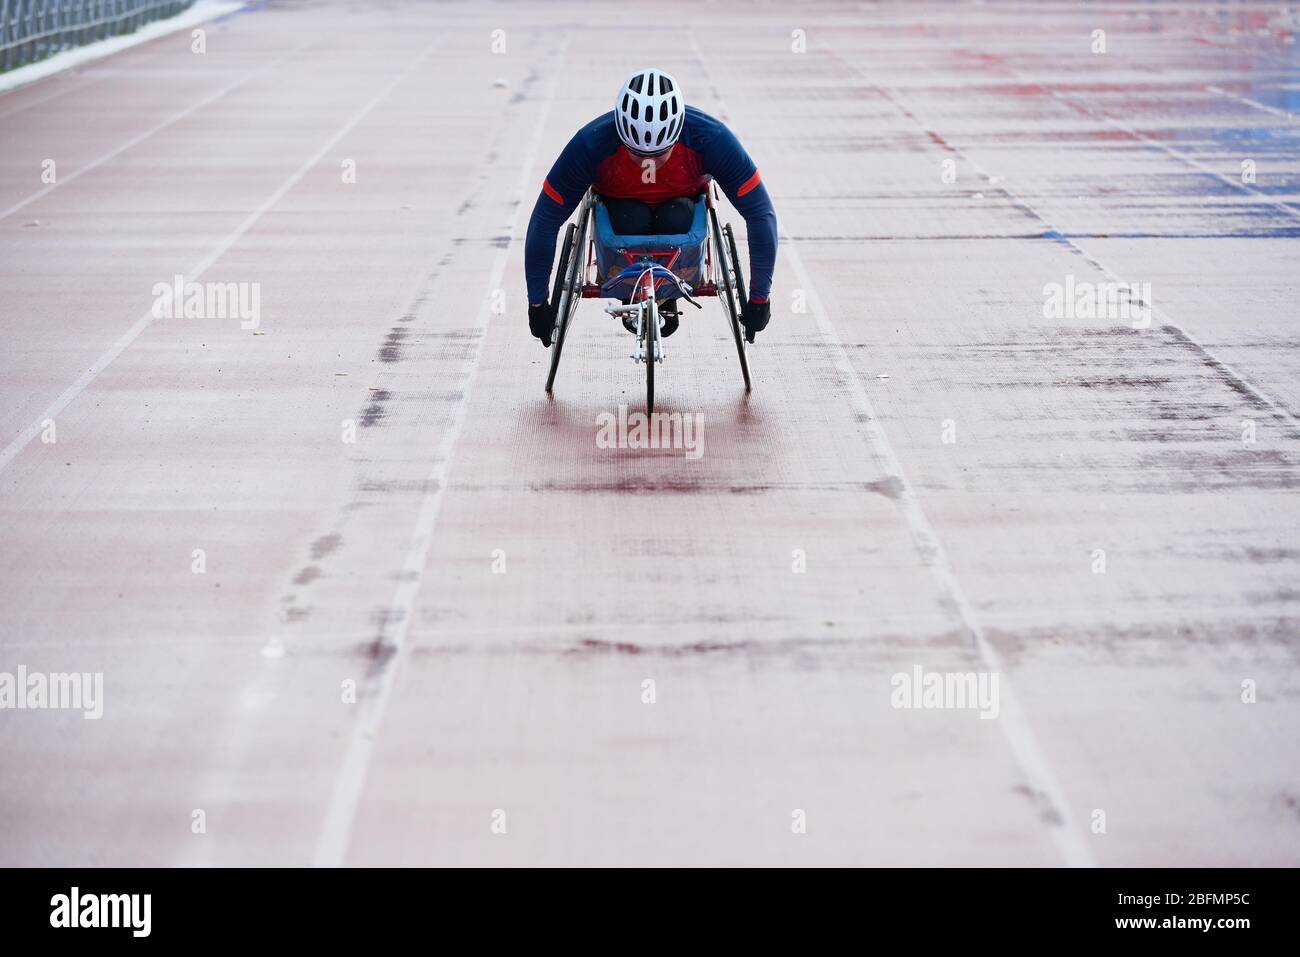 Wheelchair athletics. Paralympic champion in sport wheelchair approaching finish line while having racing competition at outdoor track and field stadi Stock Photo